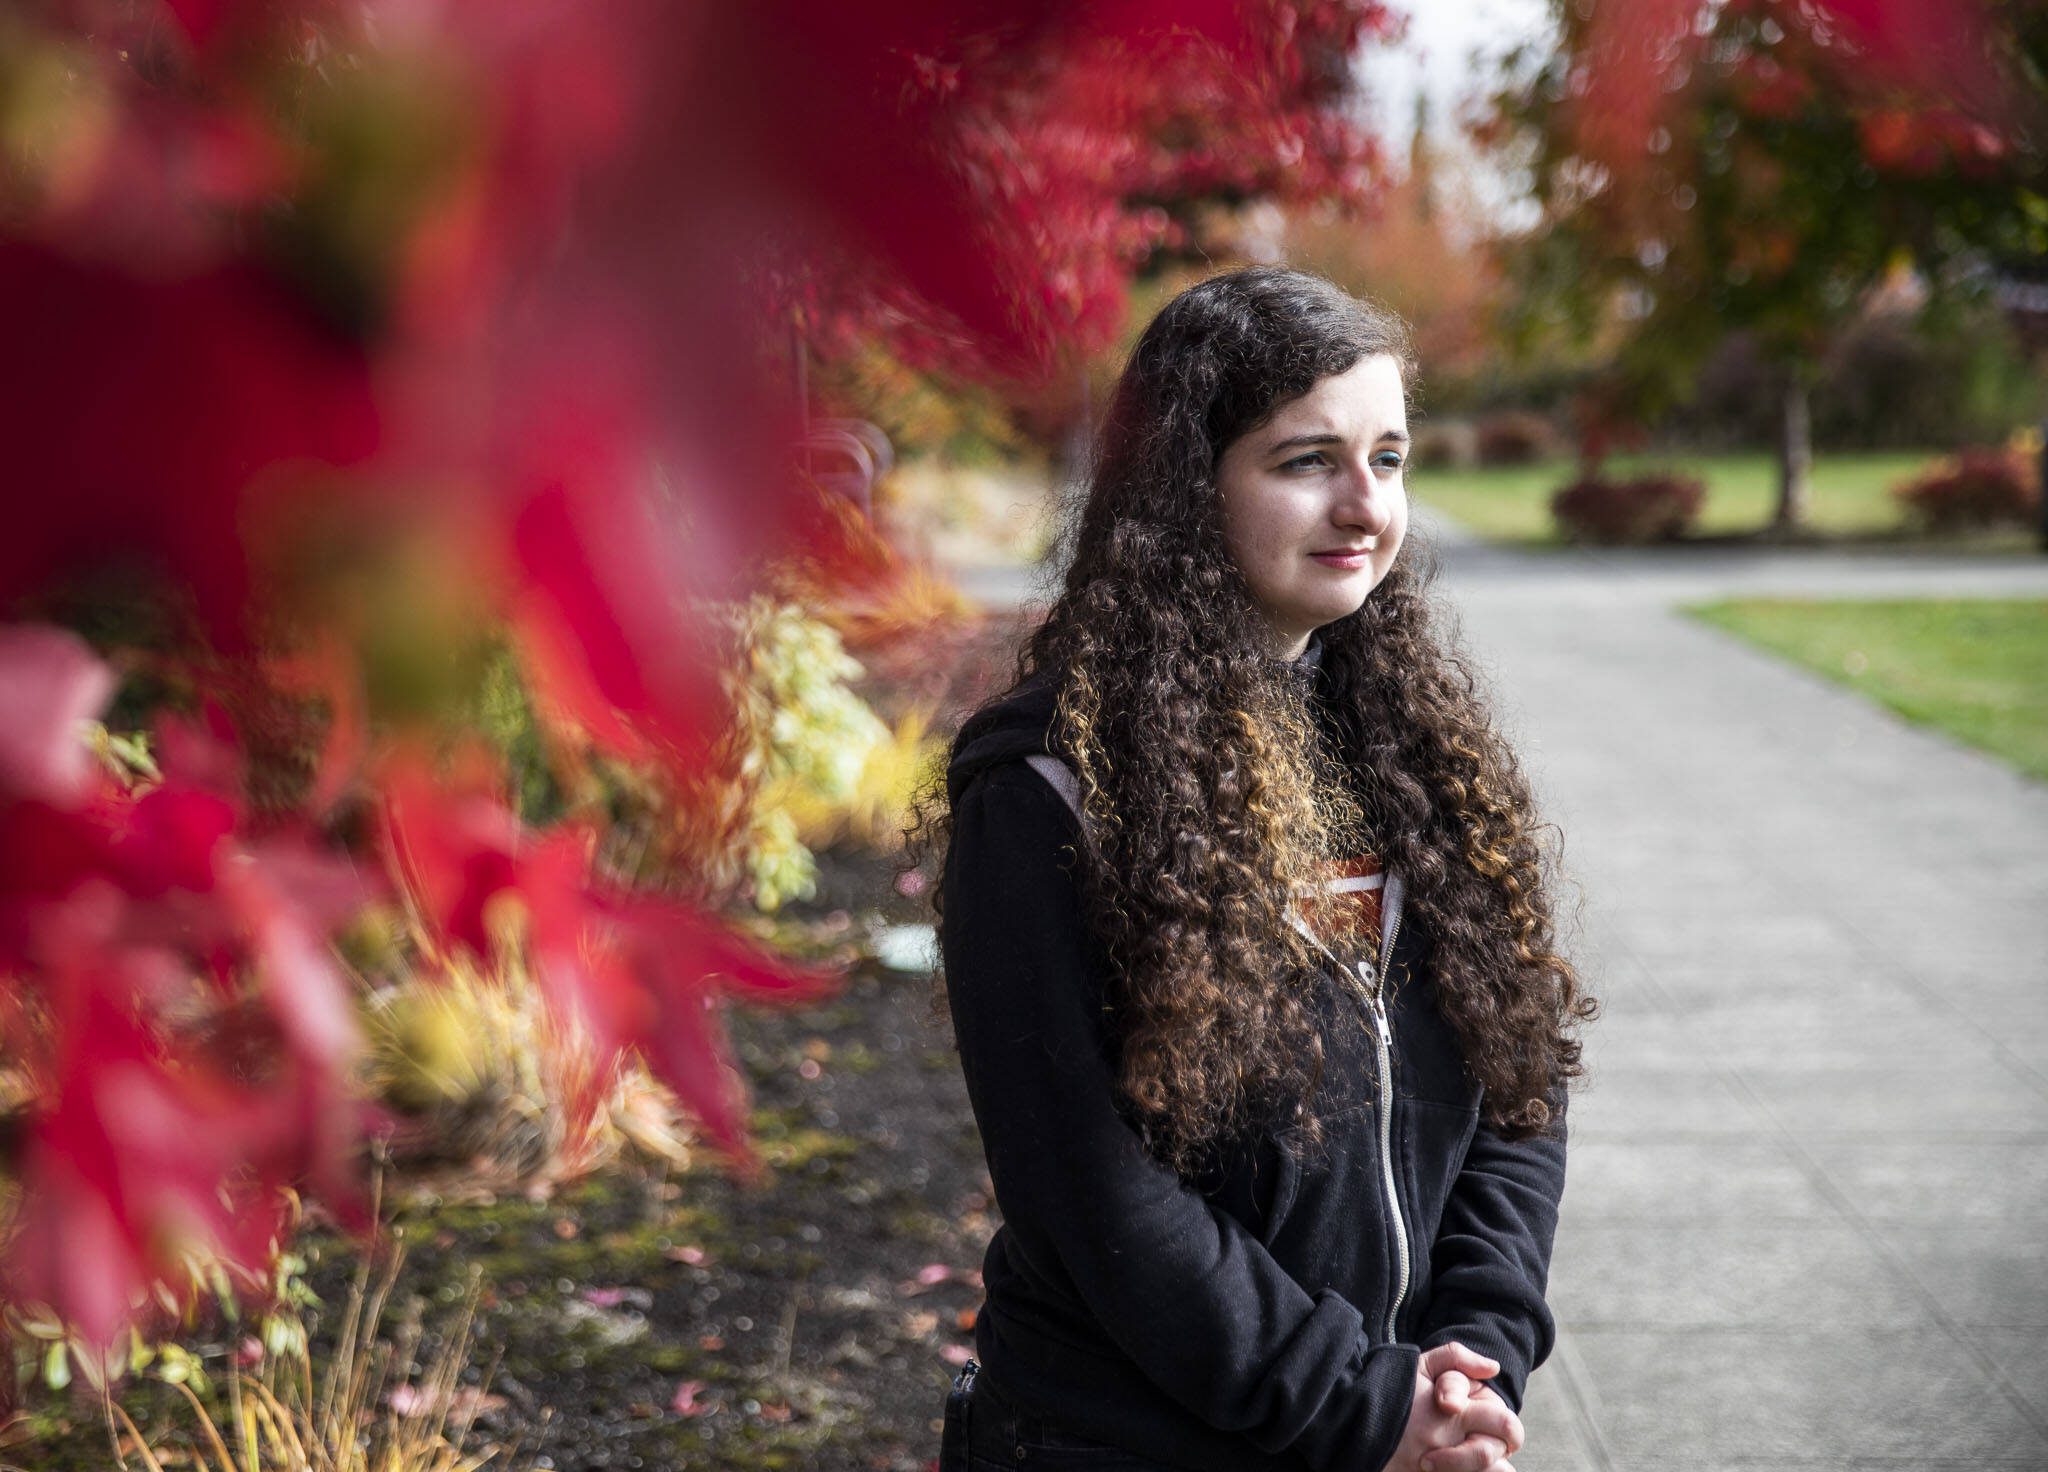 Kira Violette, a graphic designer for Everett Community College, on campus on Tuesday, Oct. 3, 2023 in Everett, Washington. Violette has $35,000 in student loan debt and will have $400 a month payments when she has to start paying them back. (Olivia Vanni / The Herald)